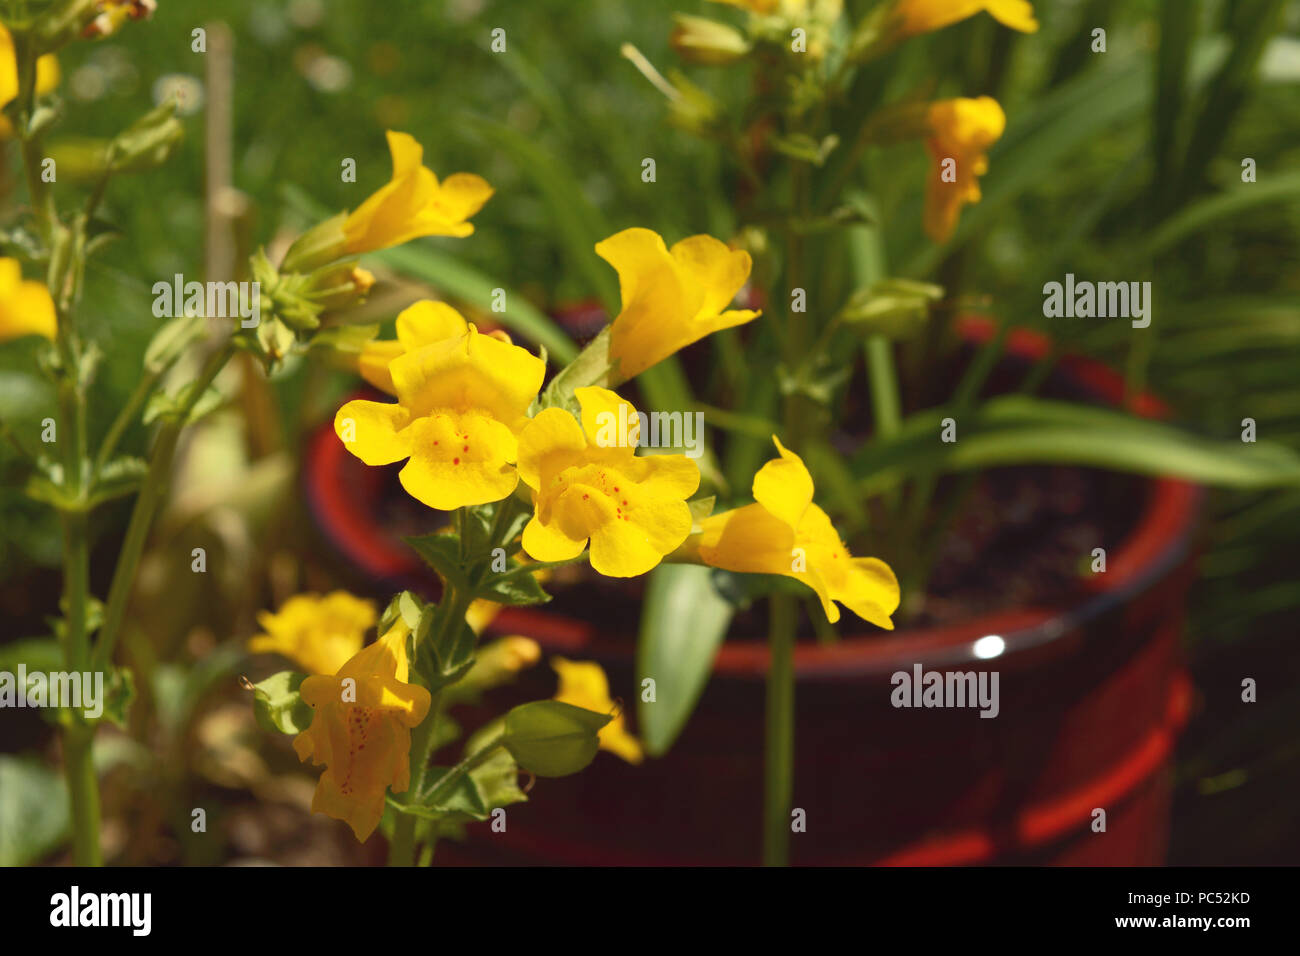 Yellow mimulus monkey flowers with red spots growing in a burgundy flower pot Stock Photo